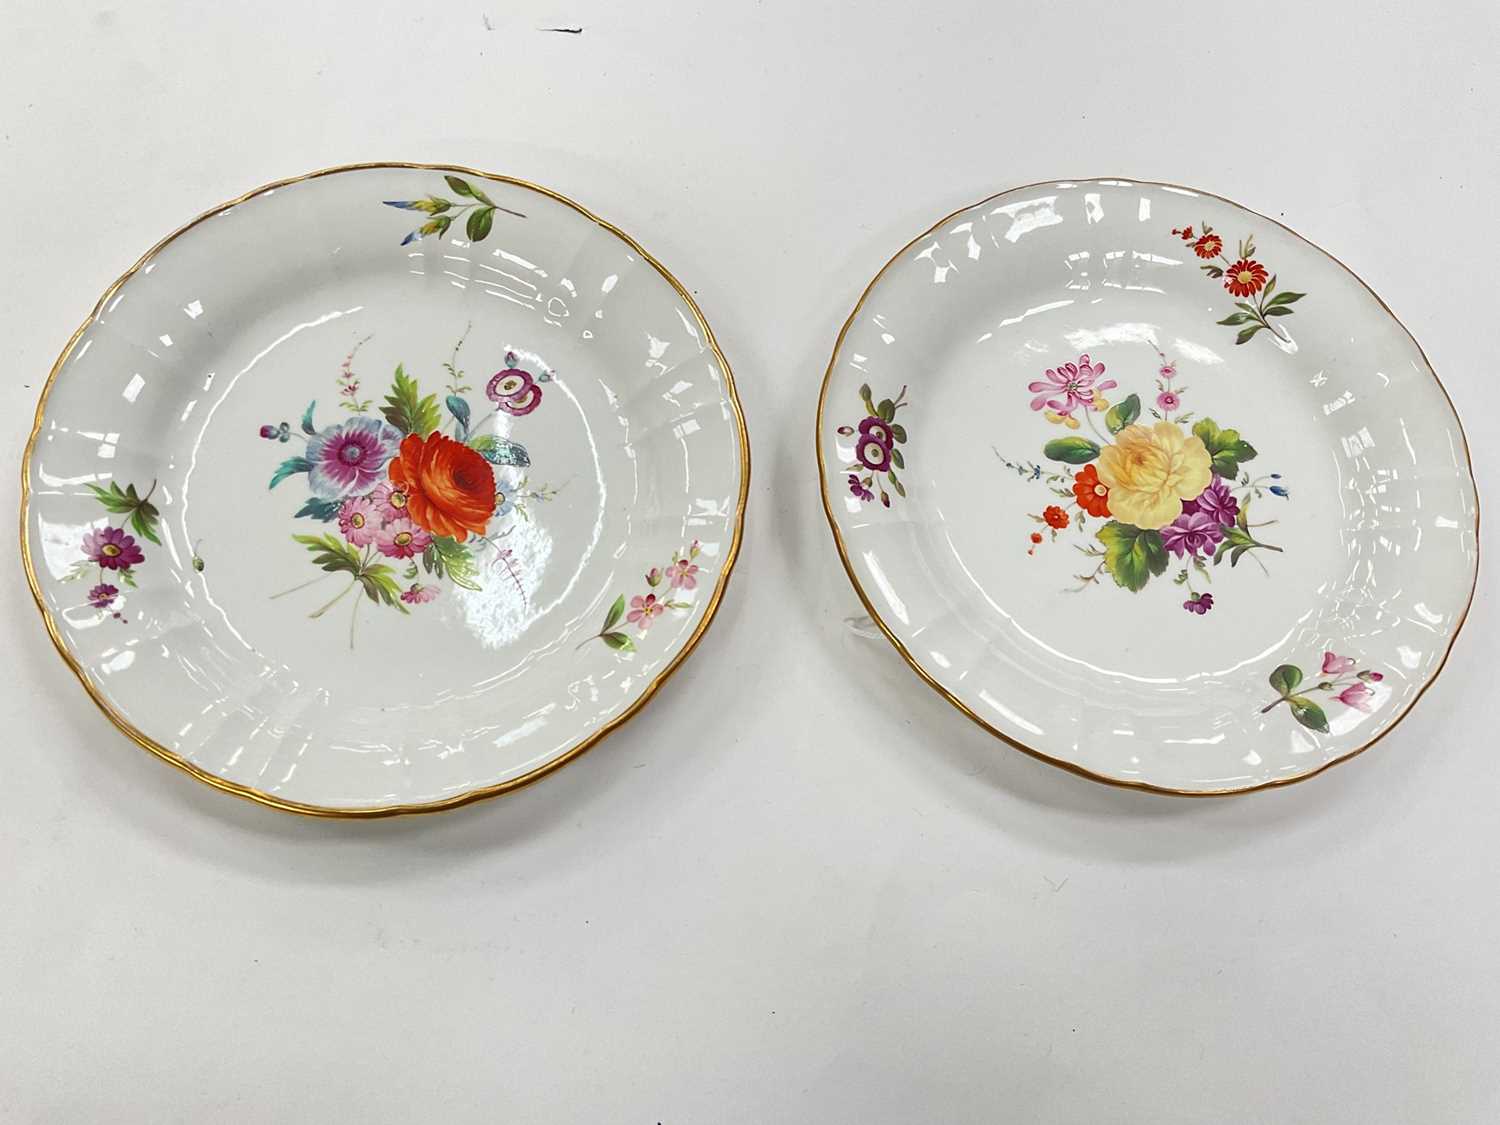 Pair of Wedgwood bone china plates, painted with flowers - Image 3 of 7